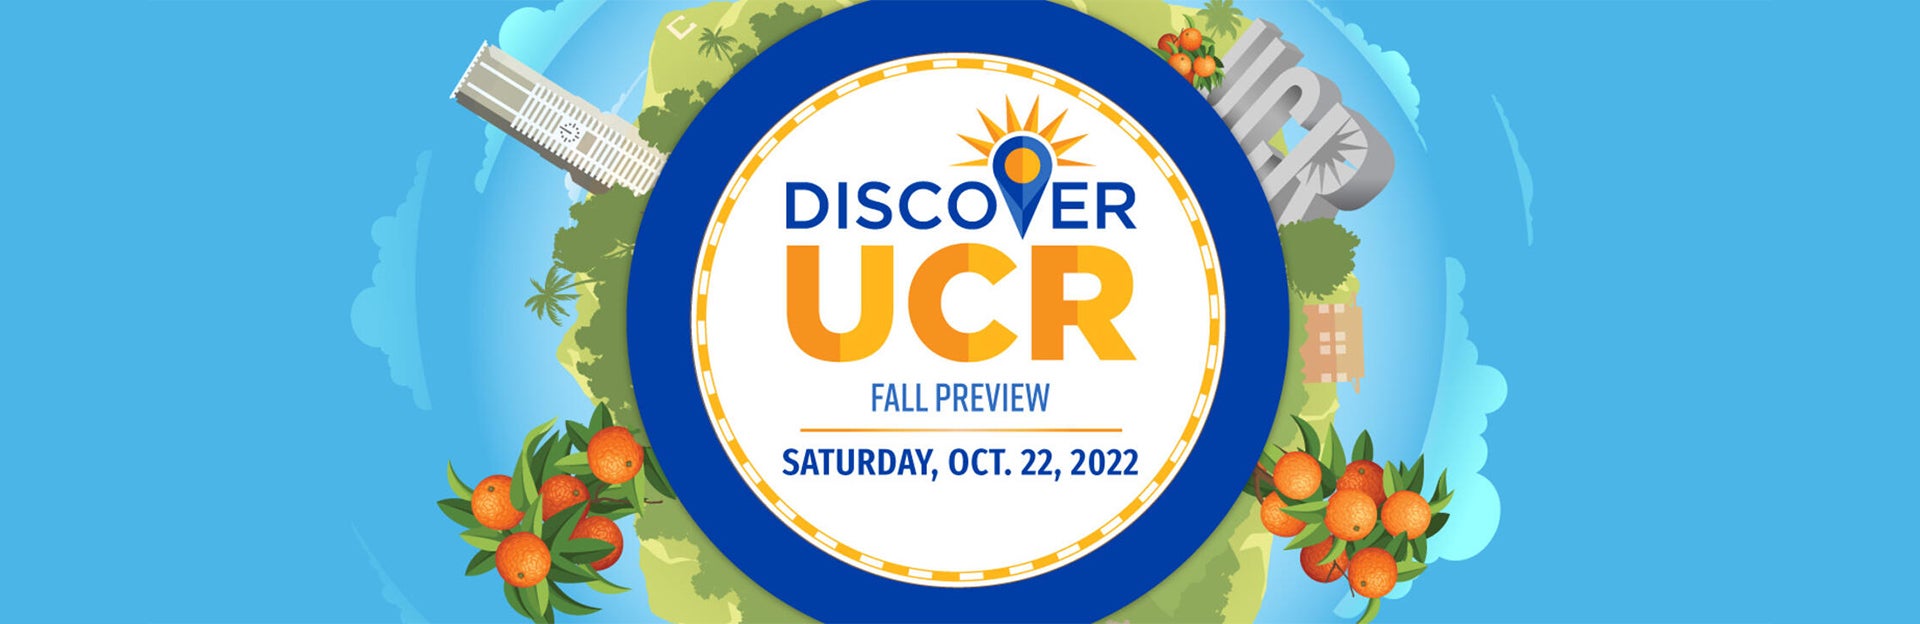 Discover UCR Day 2022